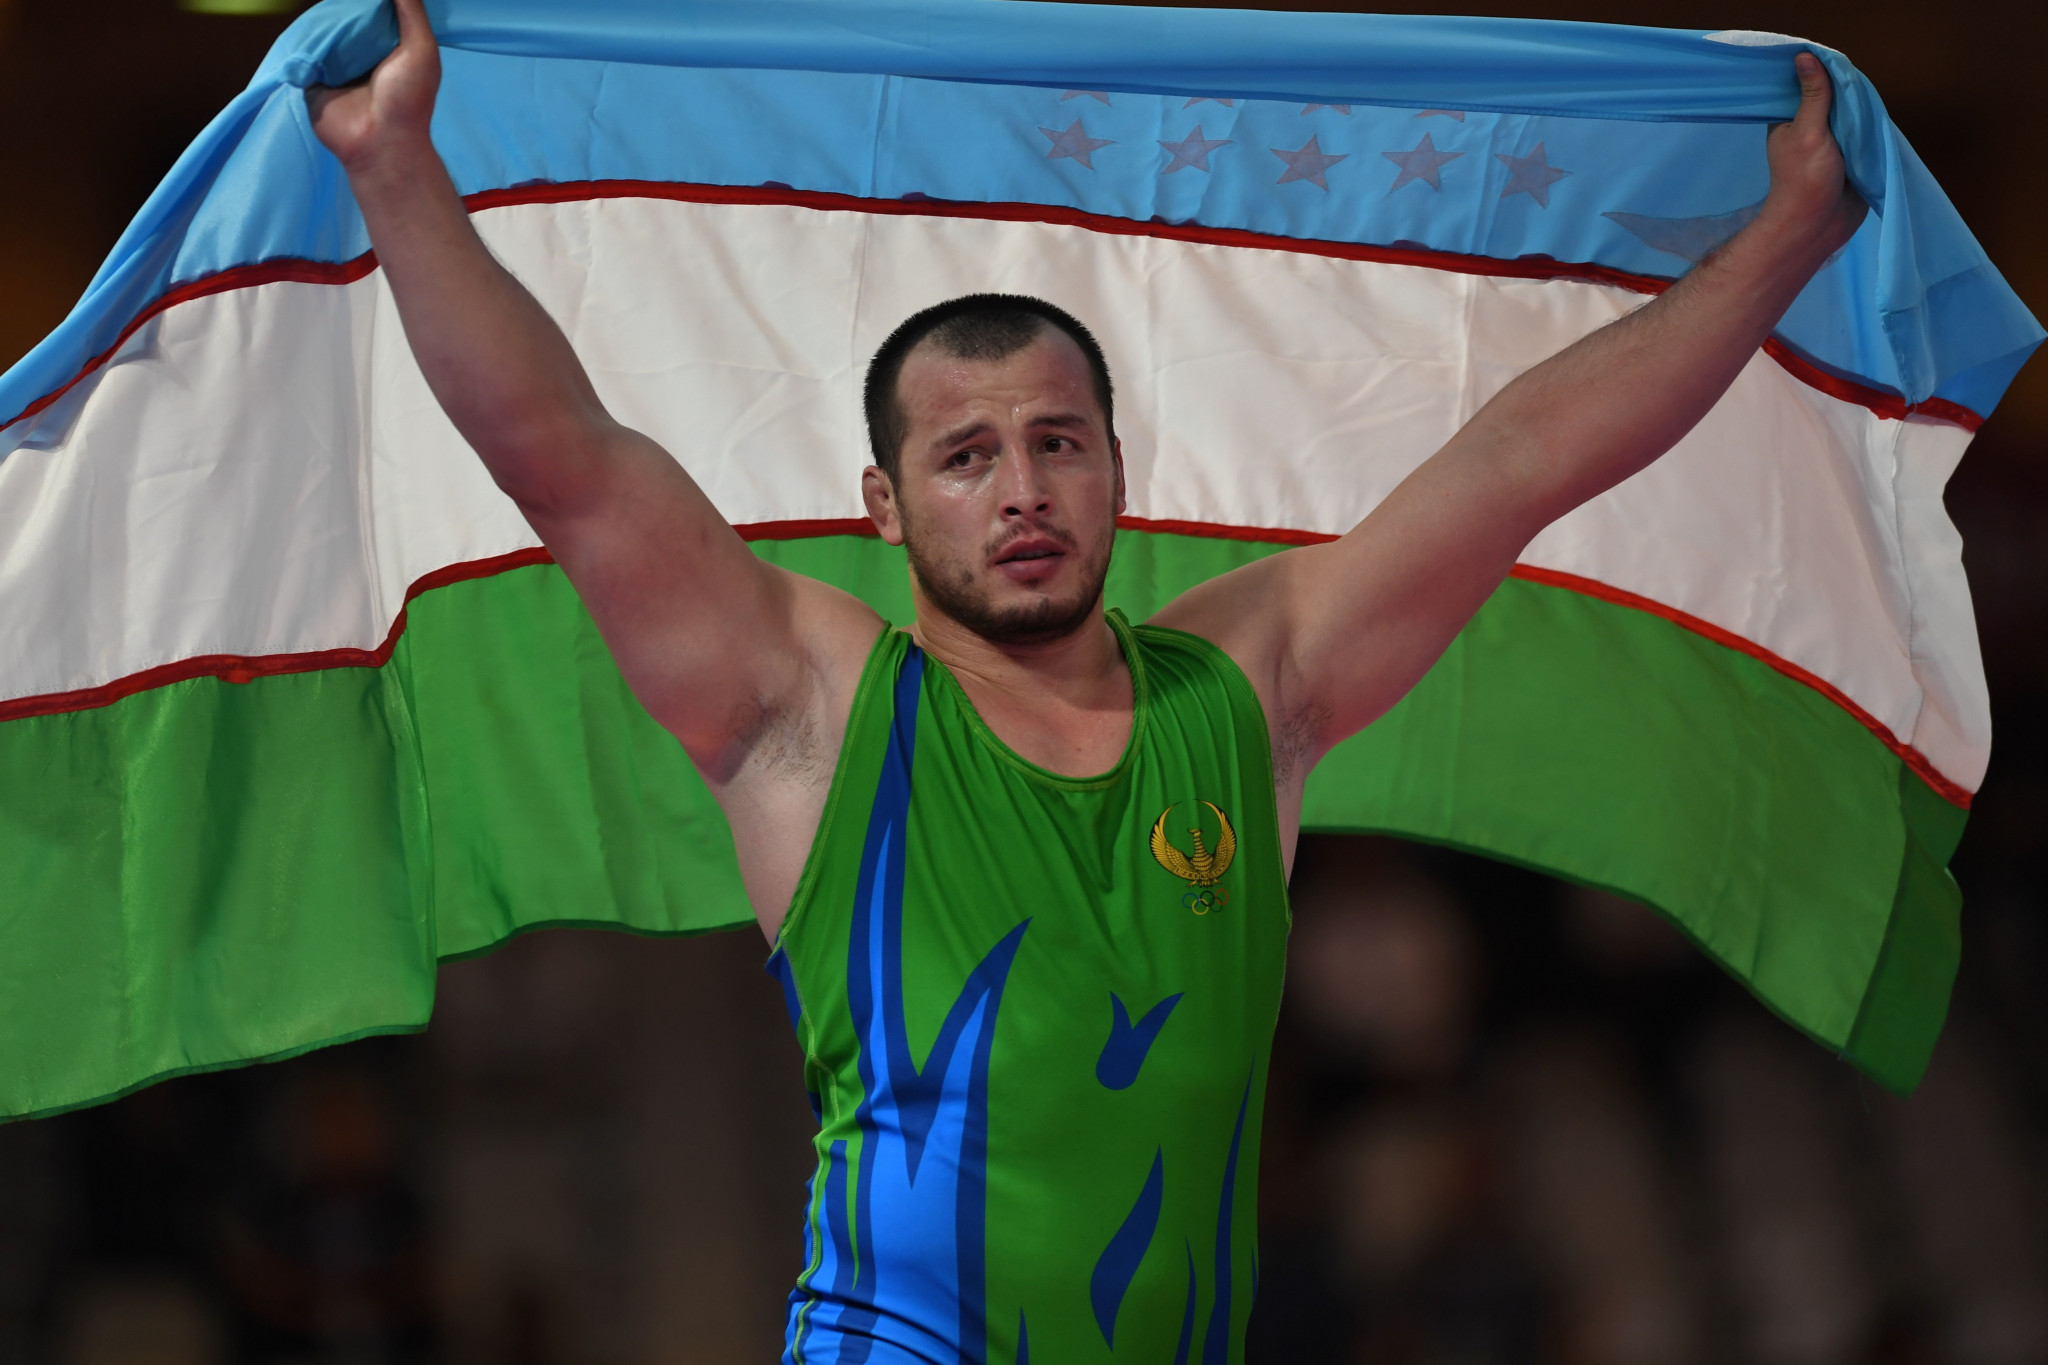 Uzbekistan won 70 medals, including 21 gold, at last year's Asian Games in Jakarta-Palembang ©Getty Images